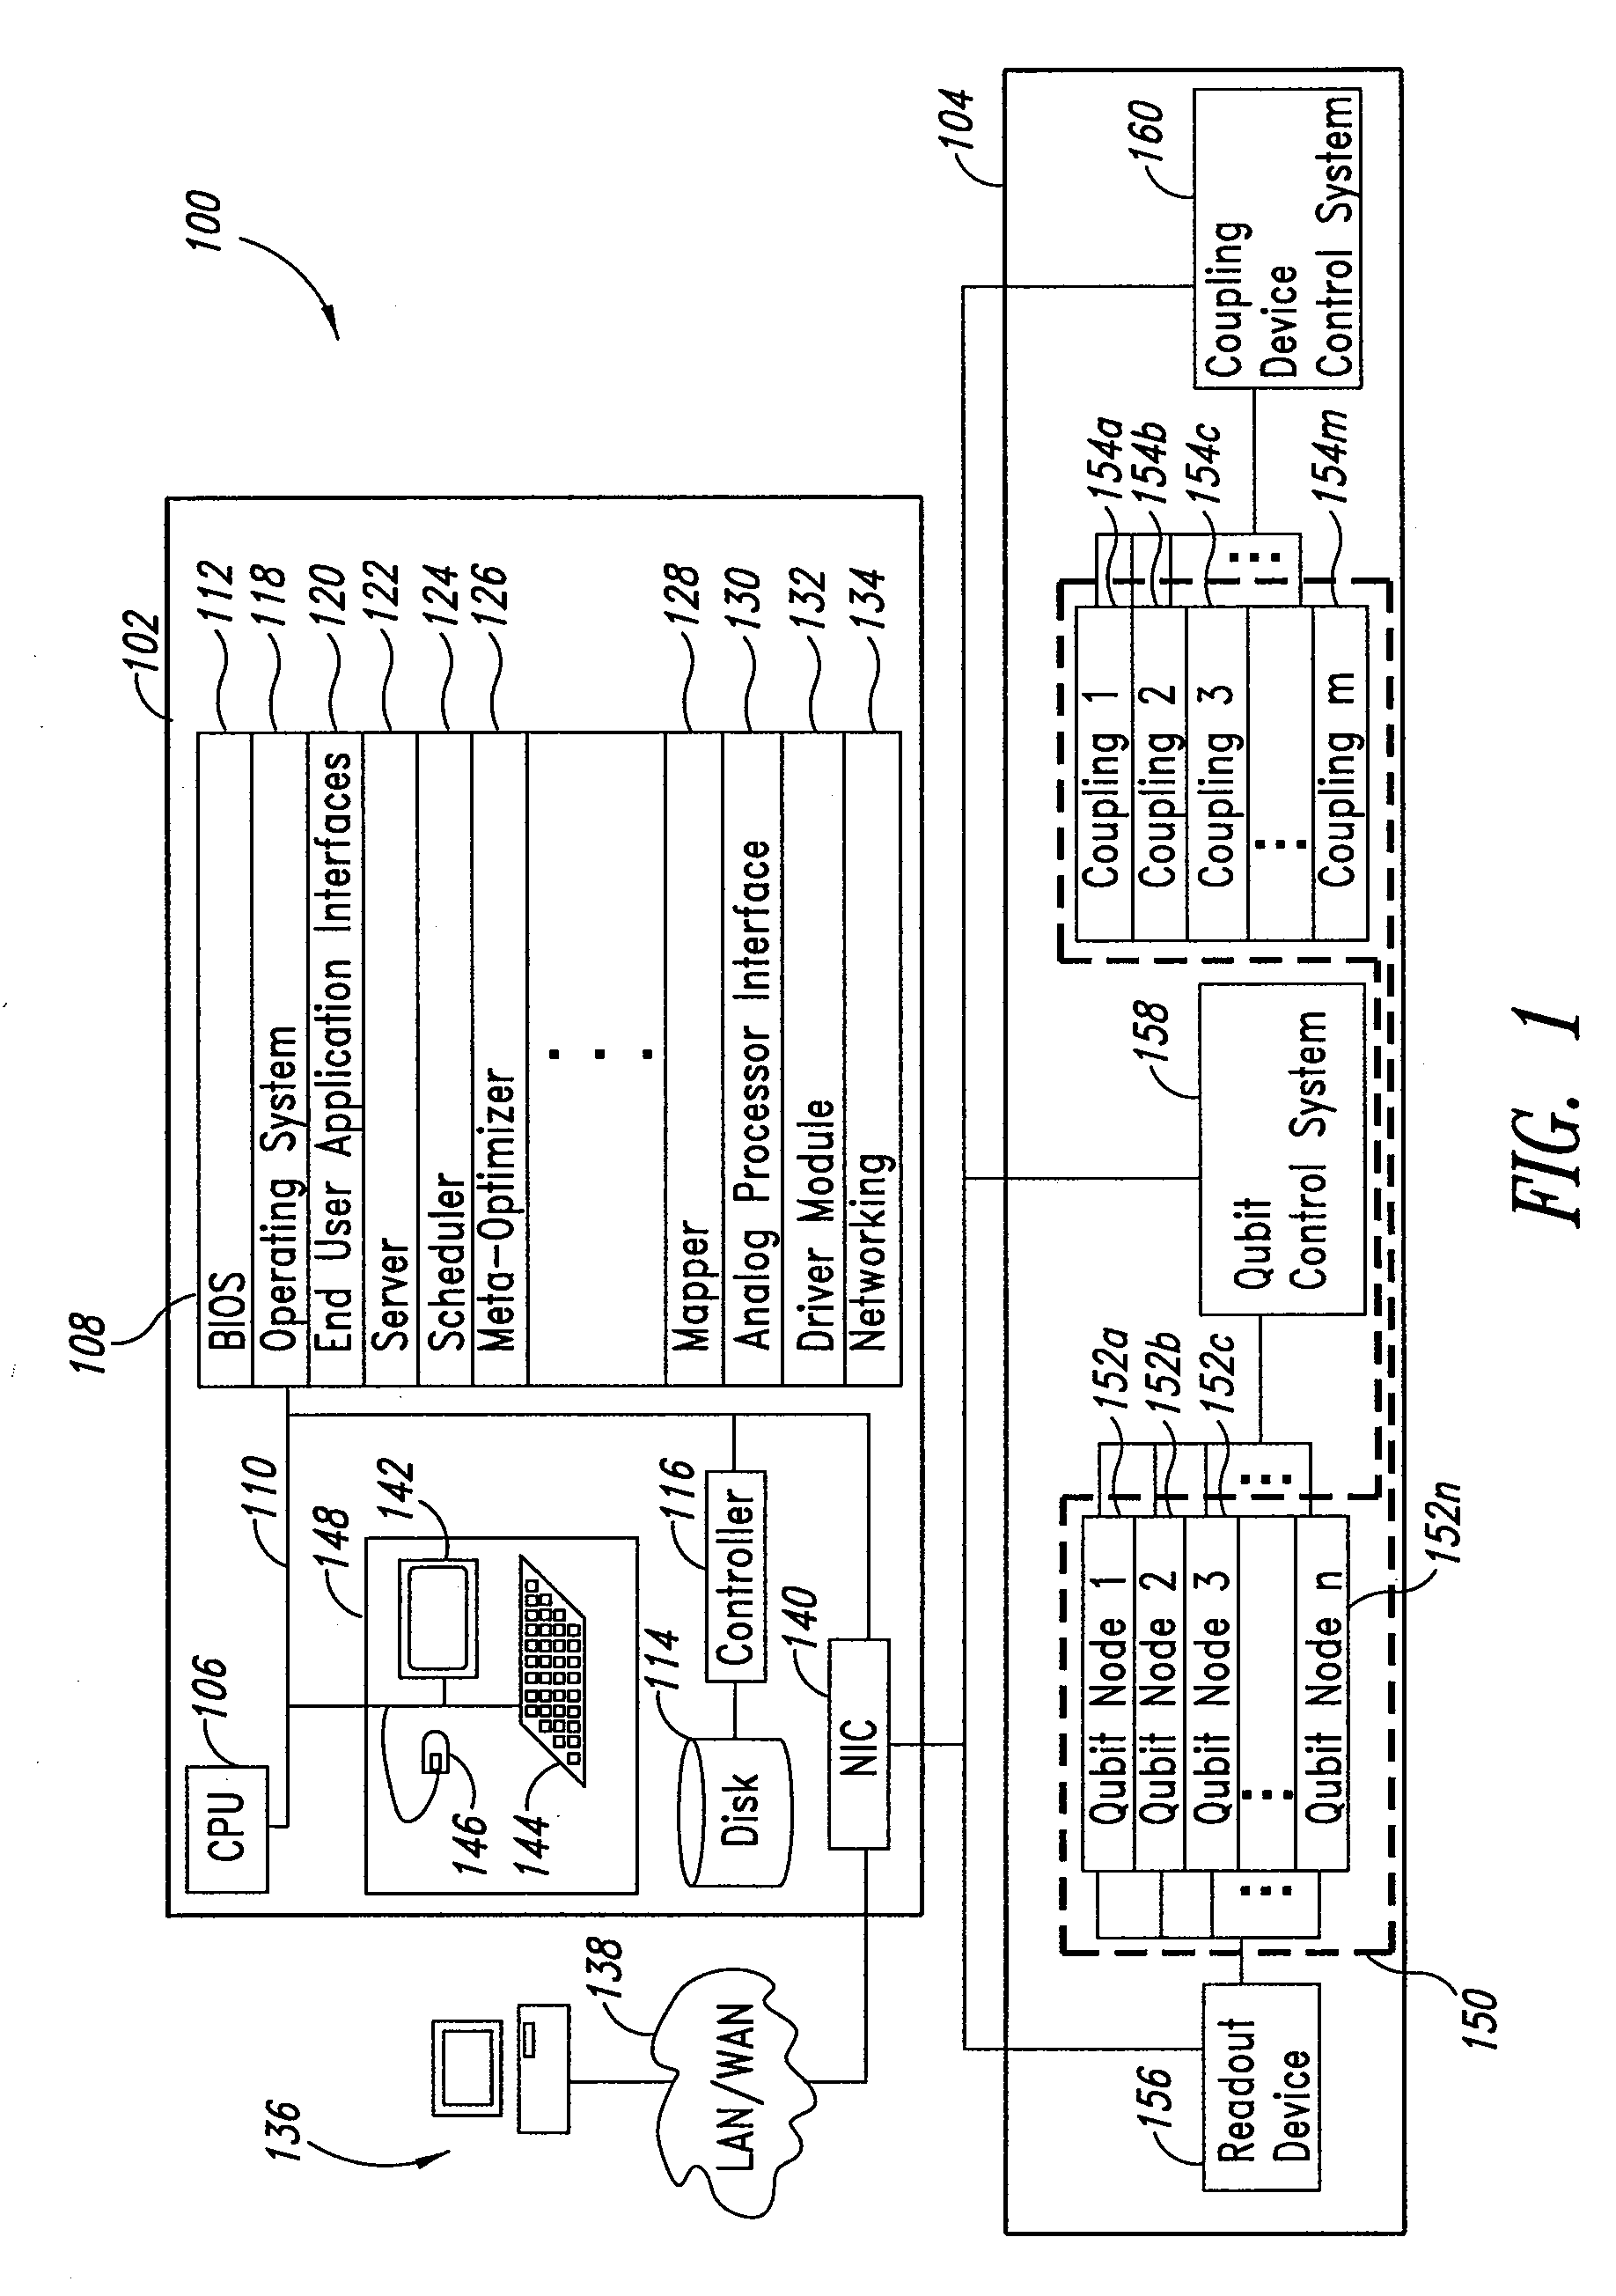 Processing relational database problems using analog processors